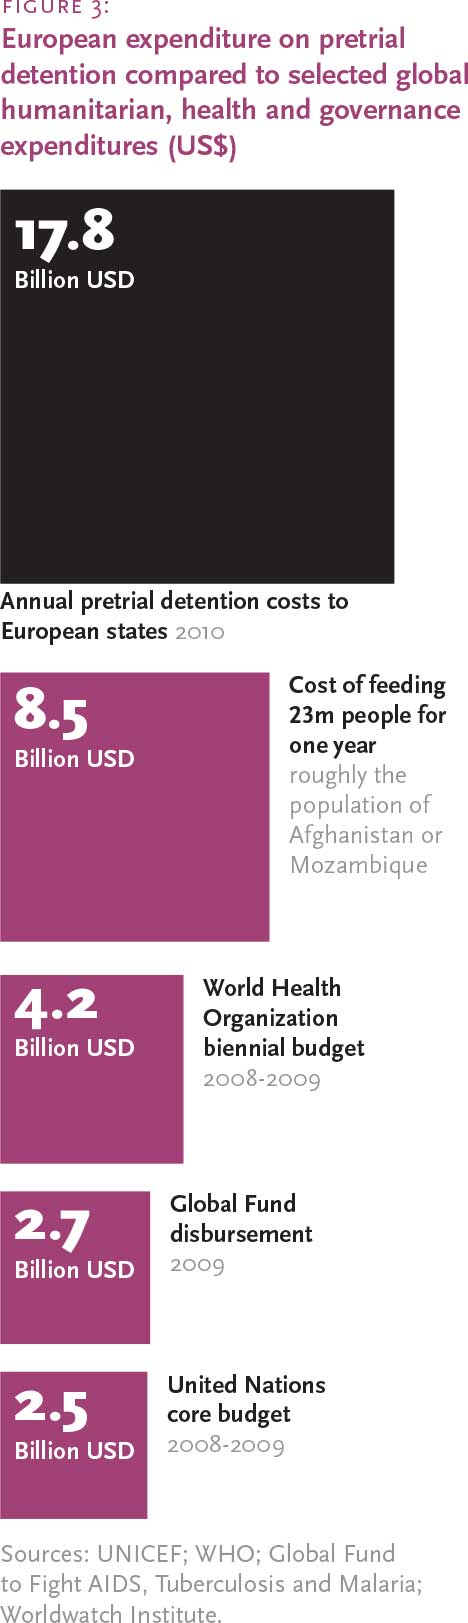 Graphic comparing 17.8 billion US dollars spent by European states on pretrial detention compared with the cost of feeding 23 million people a year (8.5 billion), the biennial budget of the World Health Organization (4.2 billion), the Global Fund disbursement (2.7 billion) and United Nations core budget (2.5 billion)